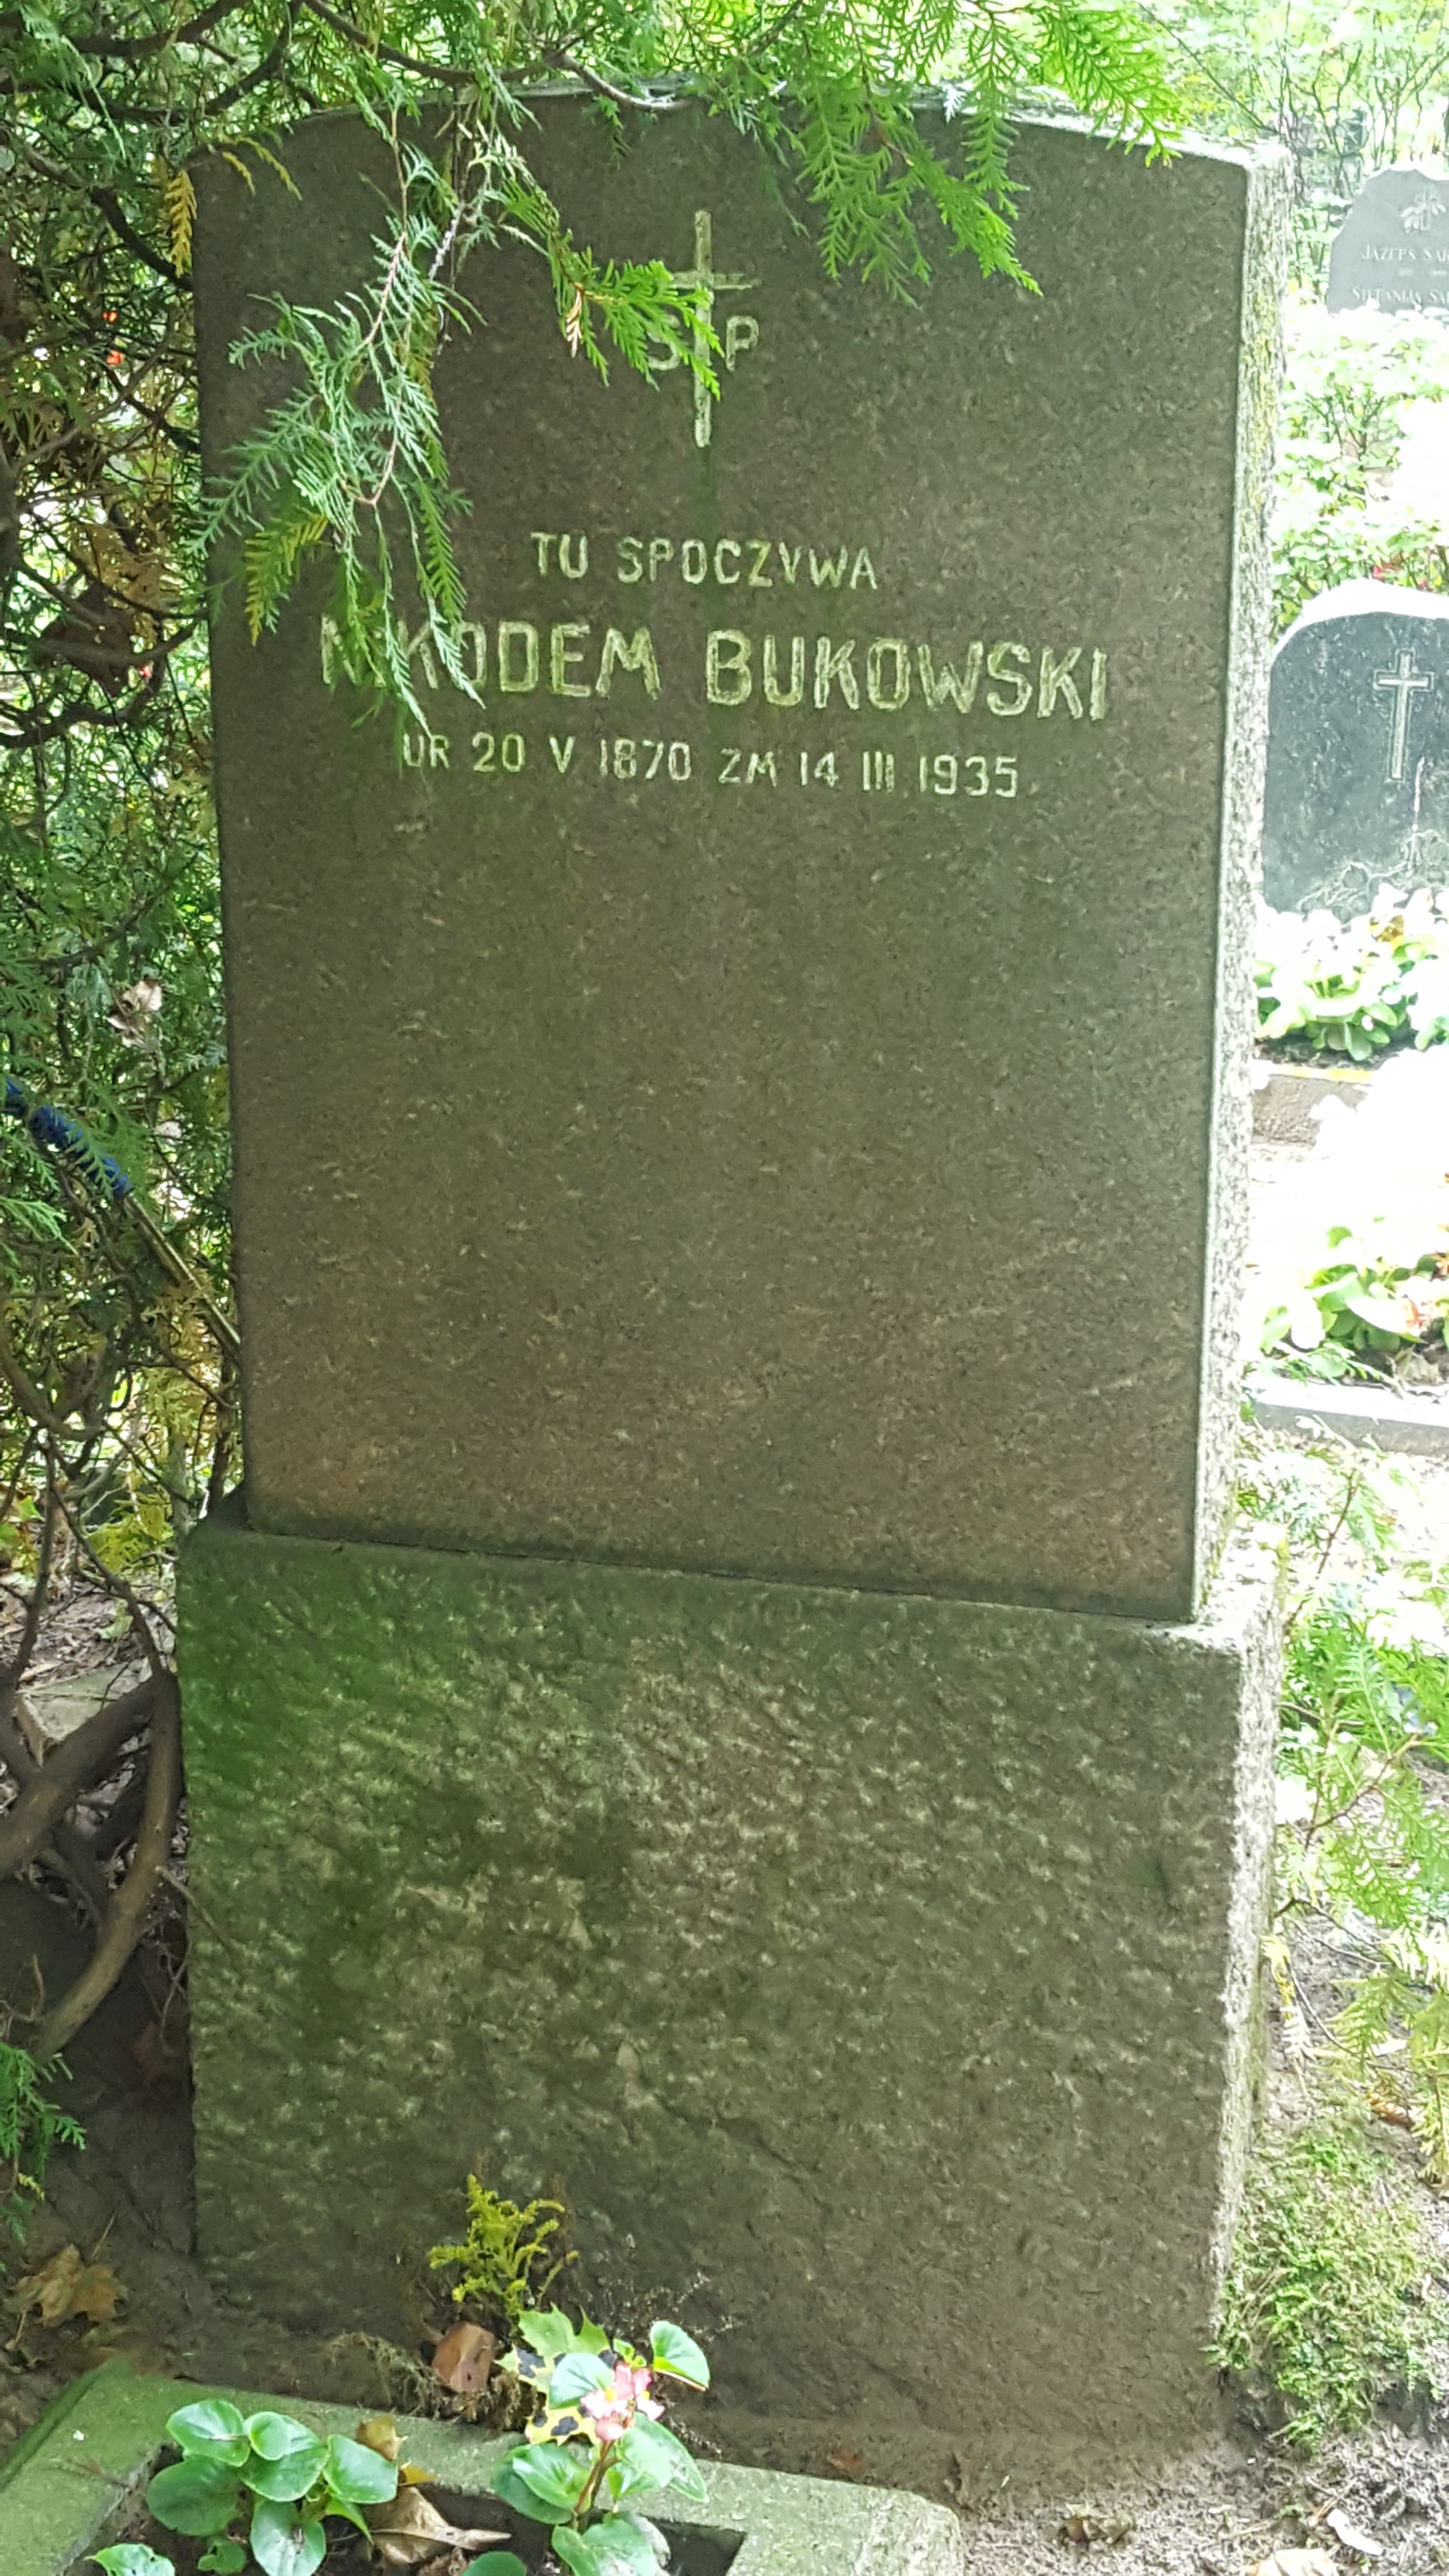 Tombstone of Nikodem Bukowski, St Michael's cemetery in Riga, as of 2021.